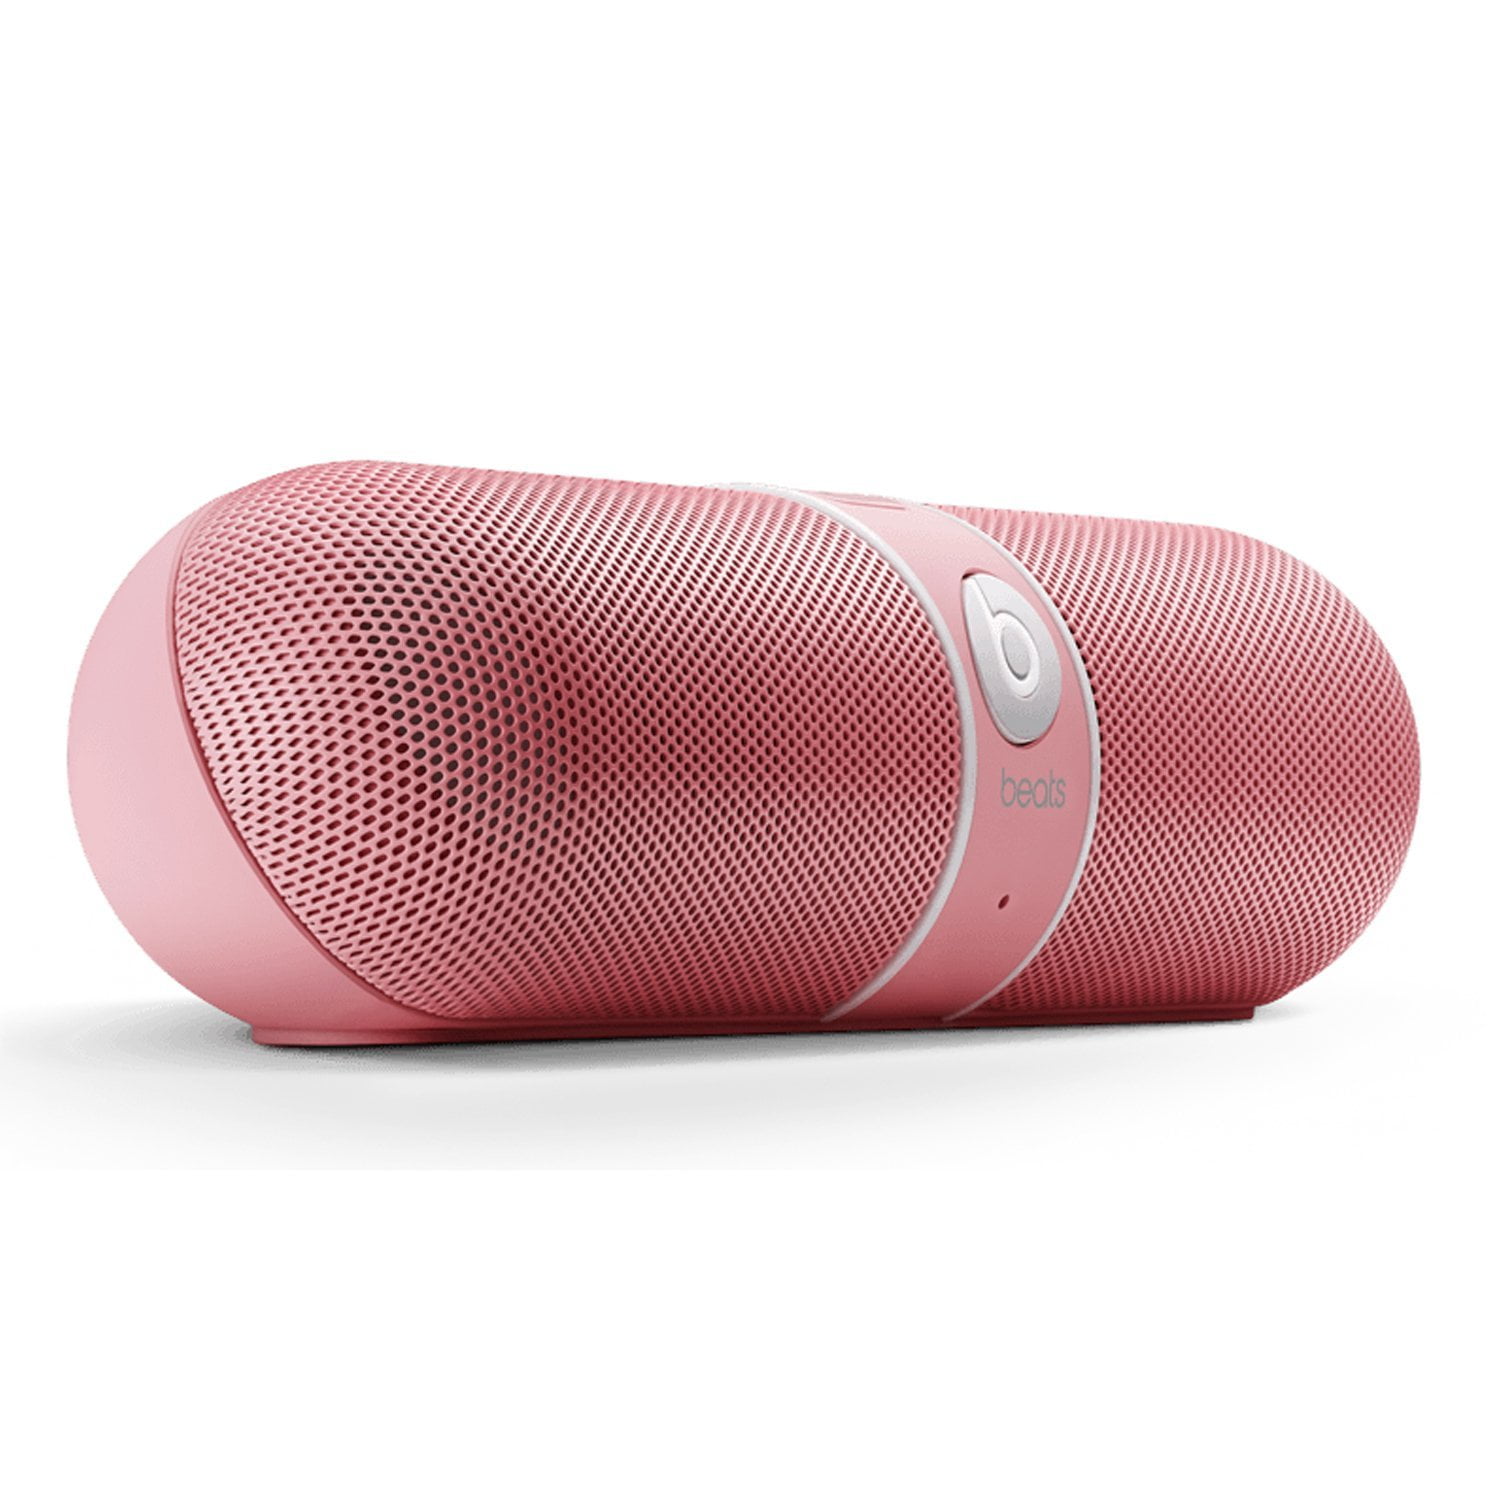 Refurbished Beats by Dr. Dre Pill 